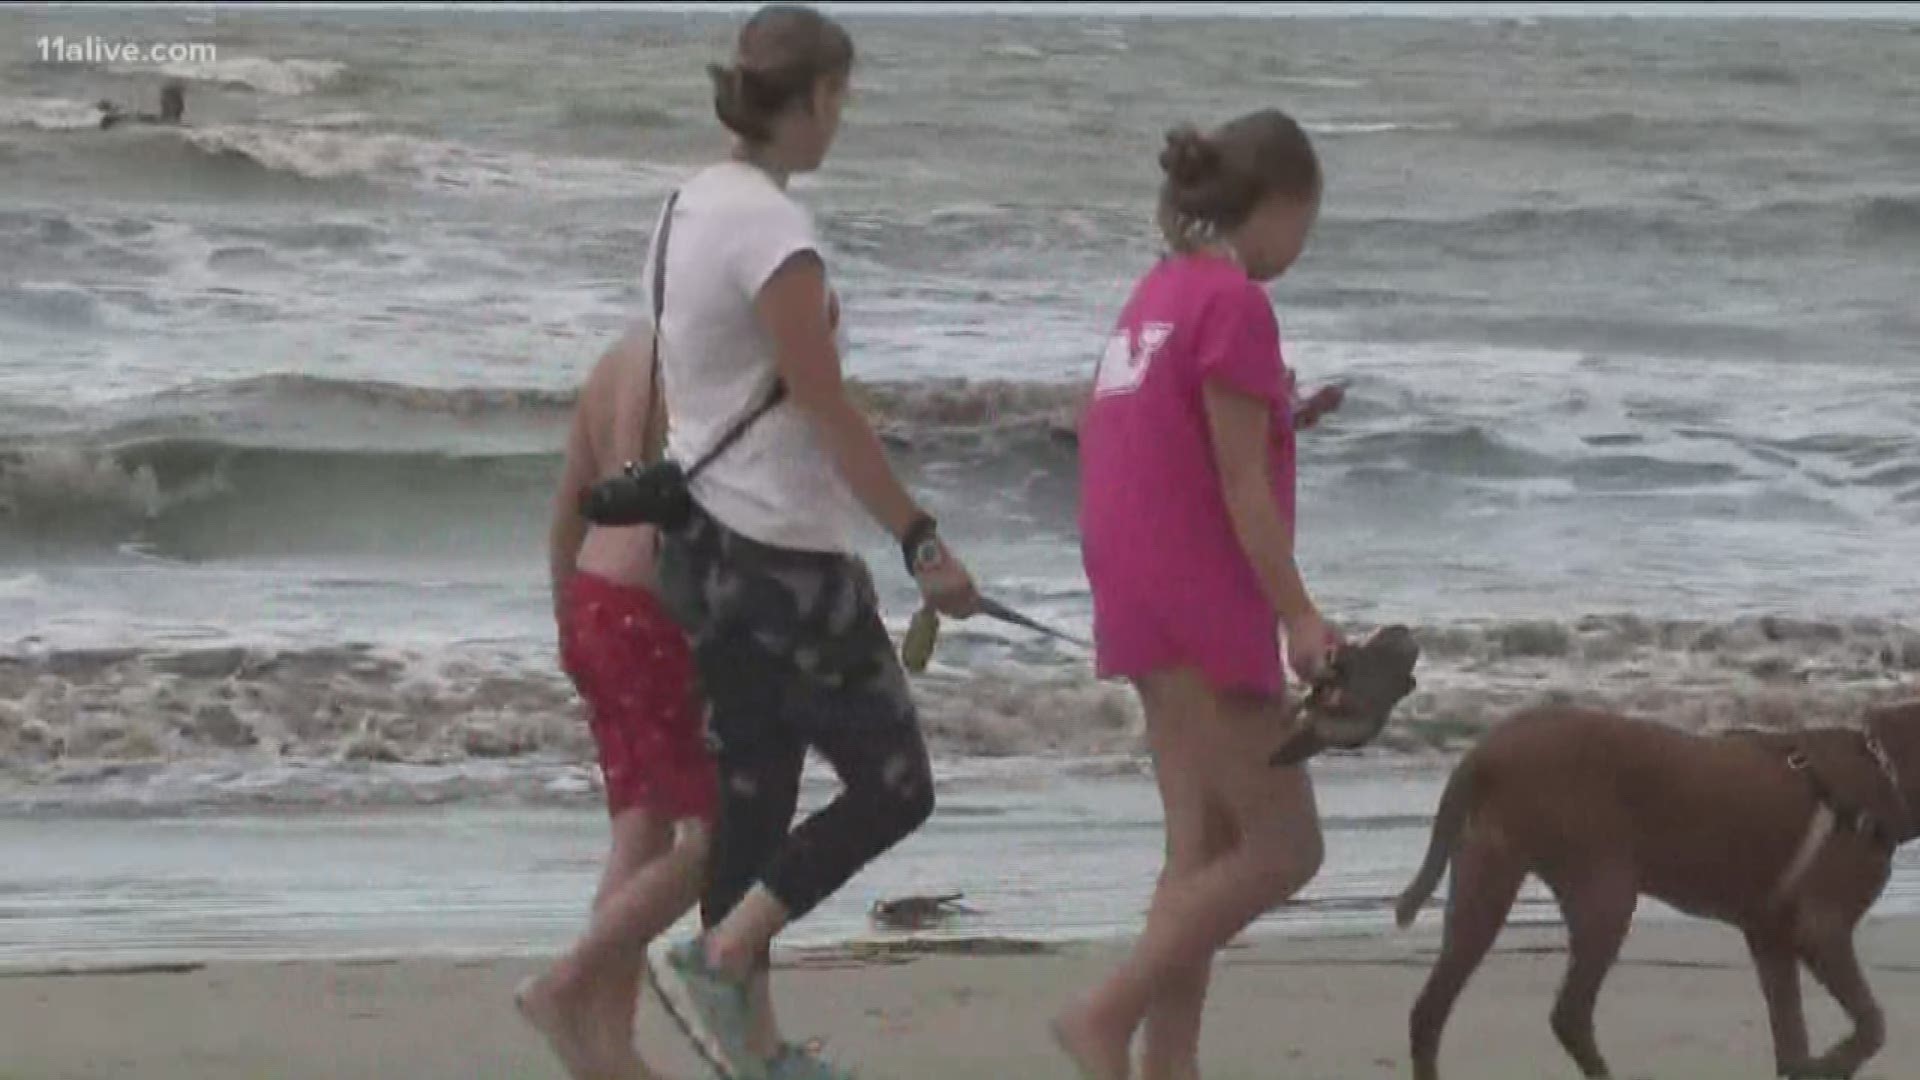 With the latest projections, locals are optimistic but authorities in Glynn County are telling vacationers and residents alike not to let their guard down.